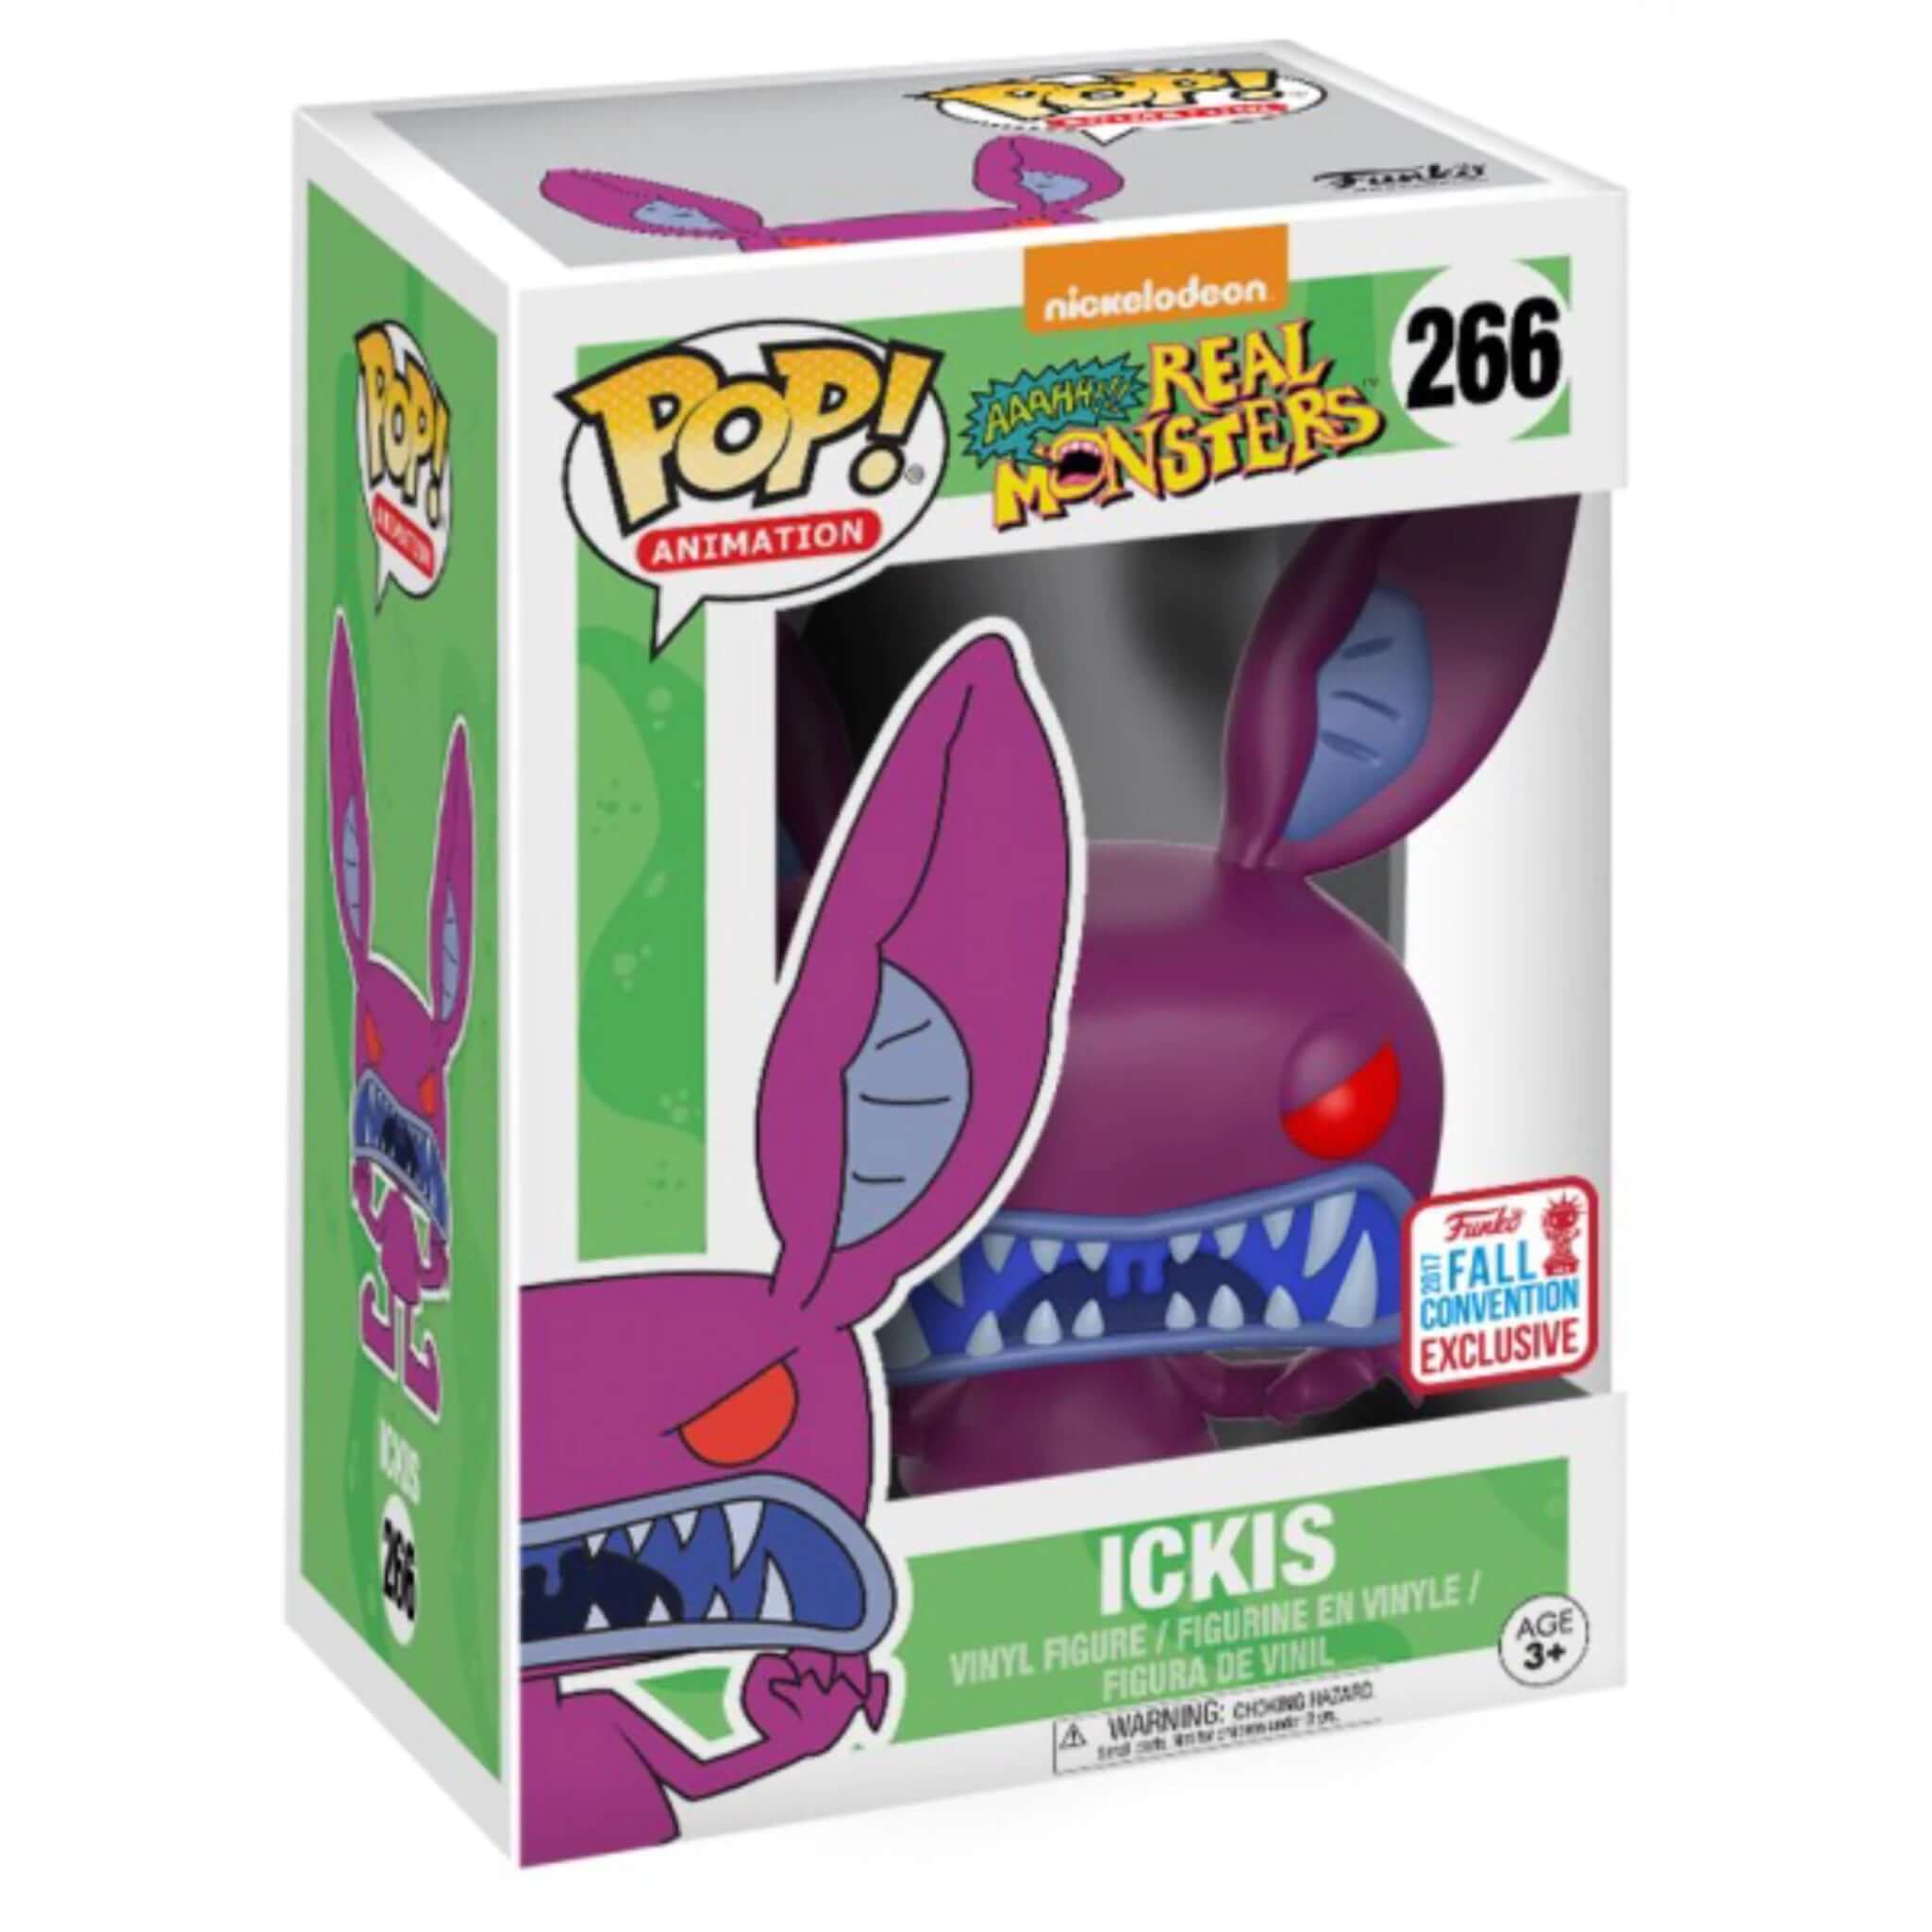 Ickis (Scary) Funko Pop! 2017 FALL CON-Jingle Truck Toys